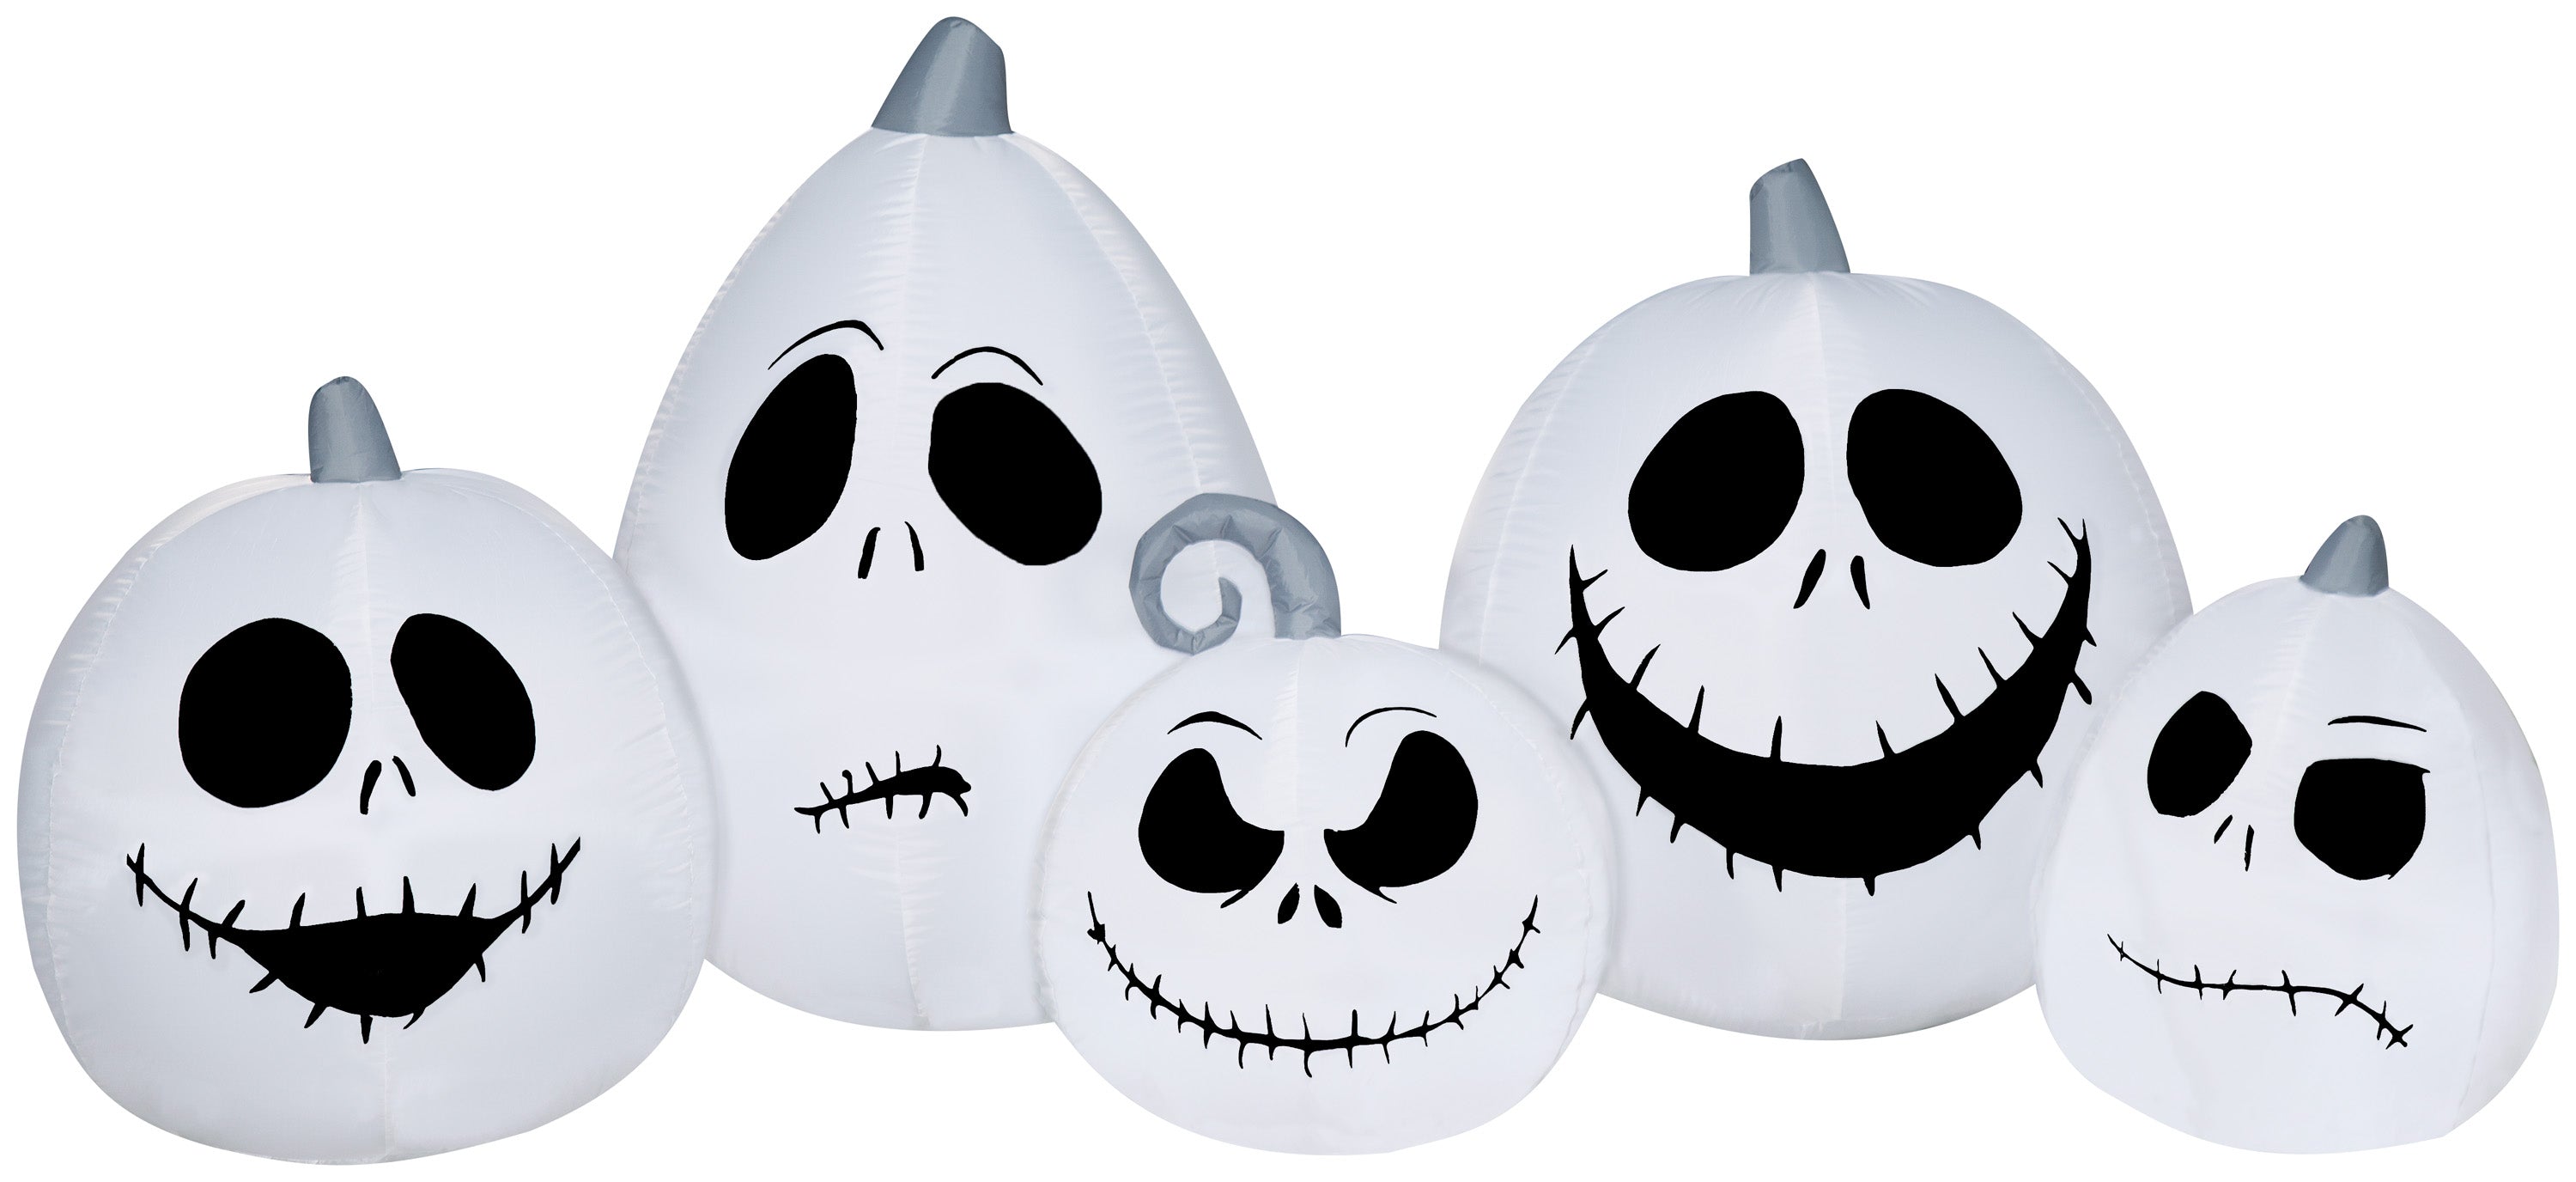 Gemmy Airblown Inflatable Jack Skellington White Pumpkin Collection, 3.5 ft Tall, white